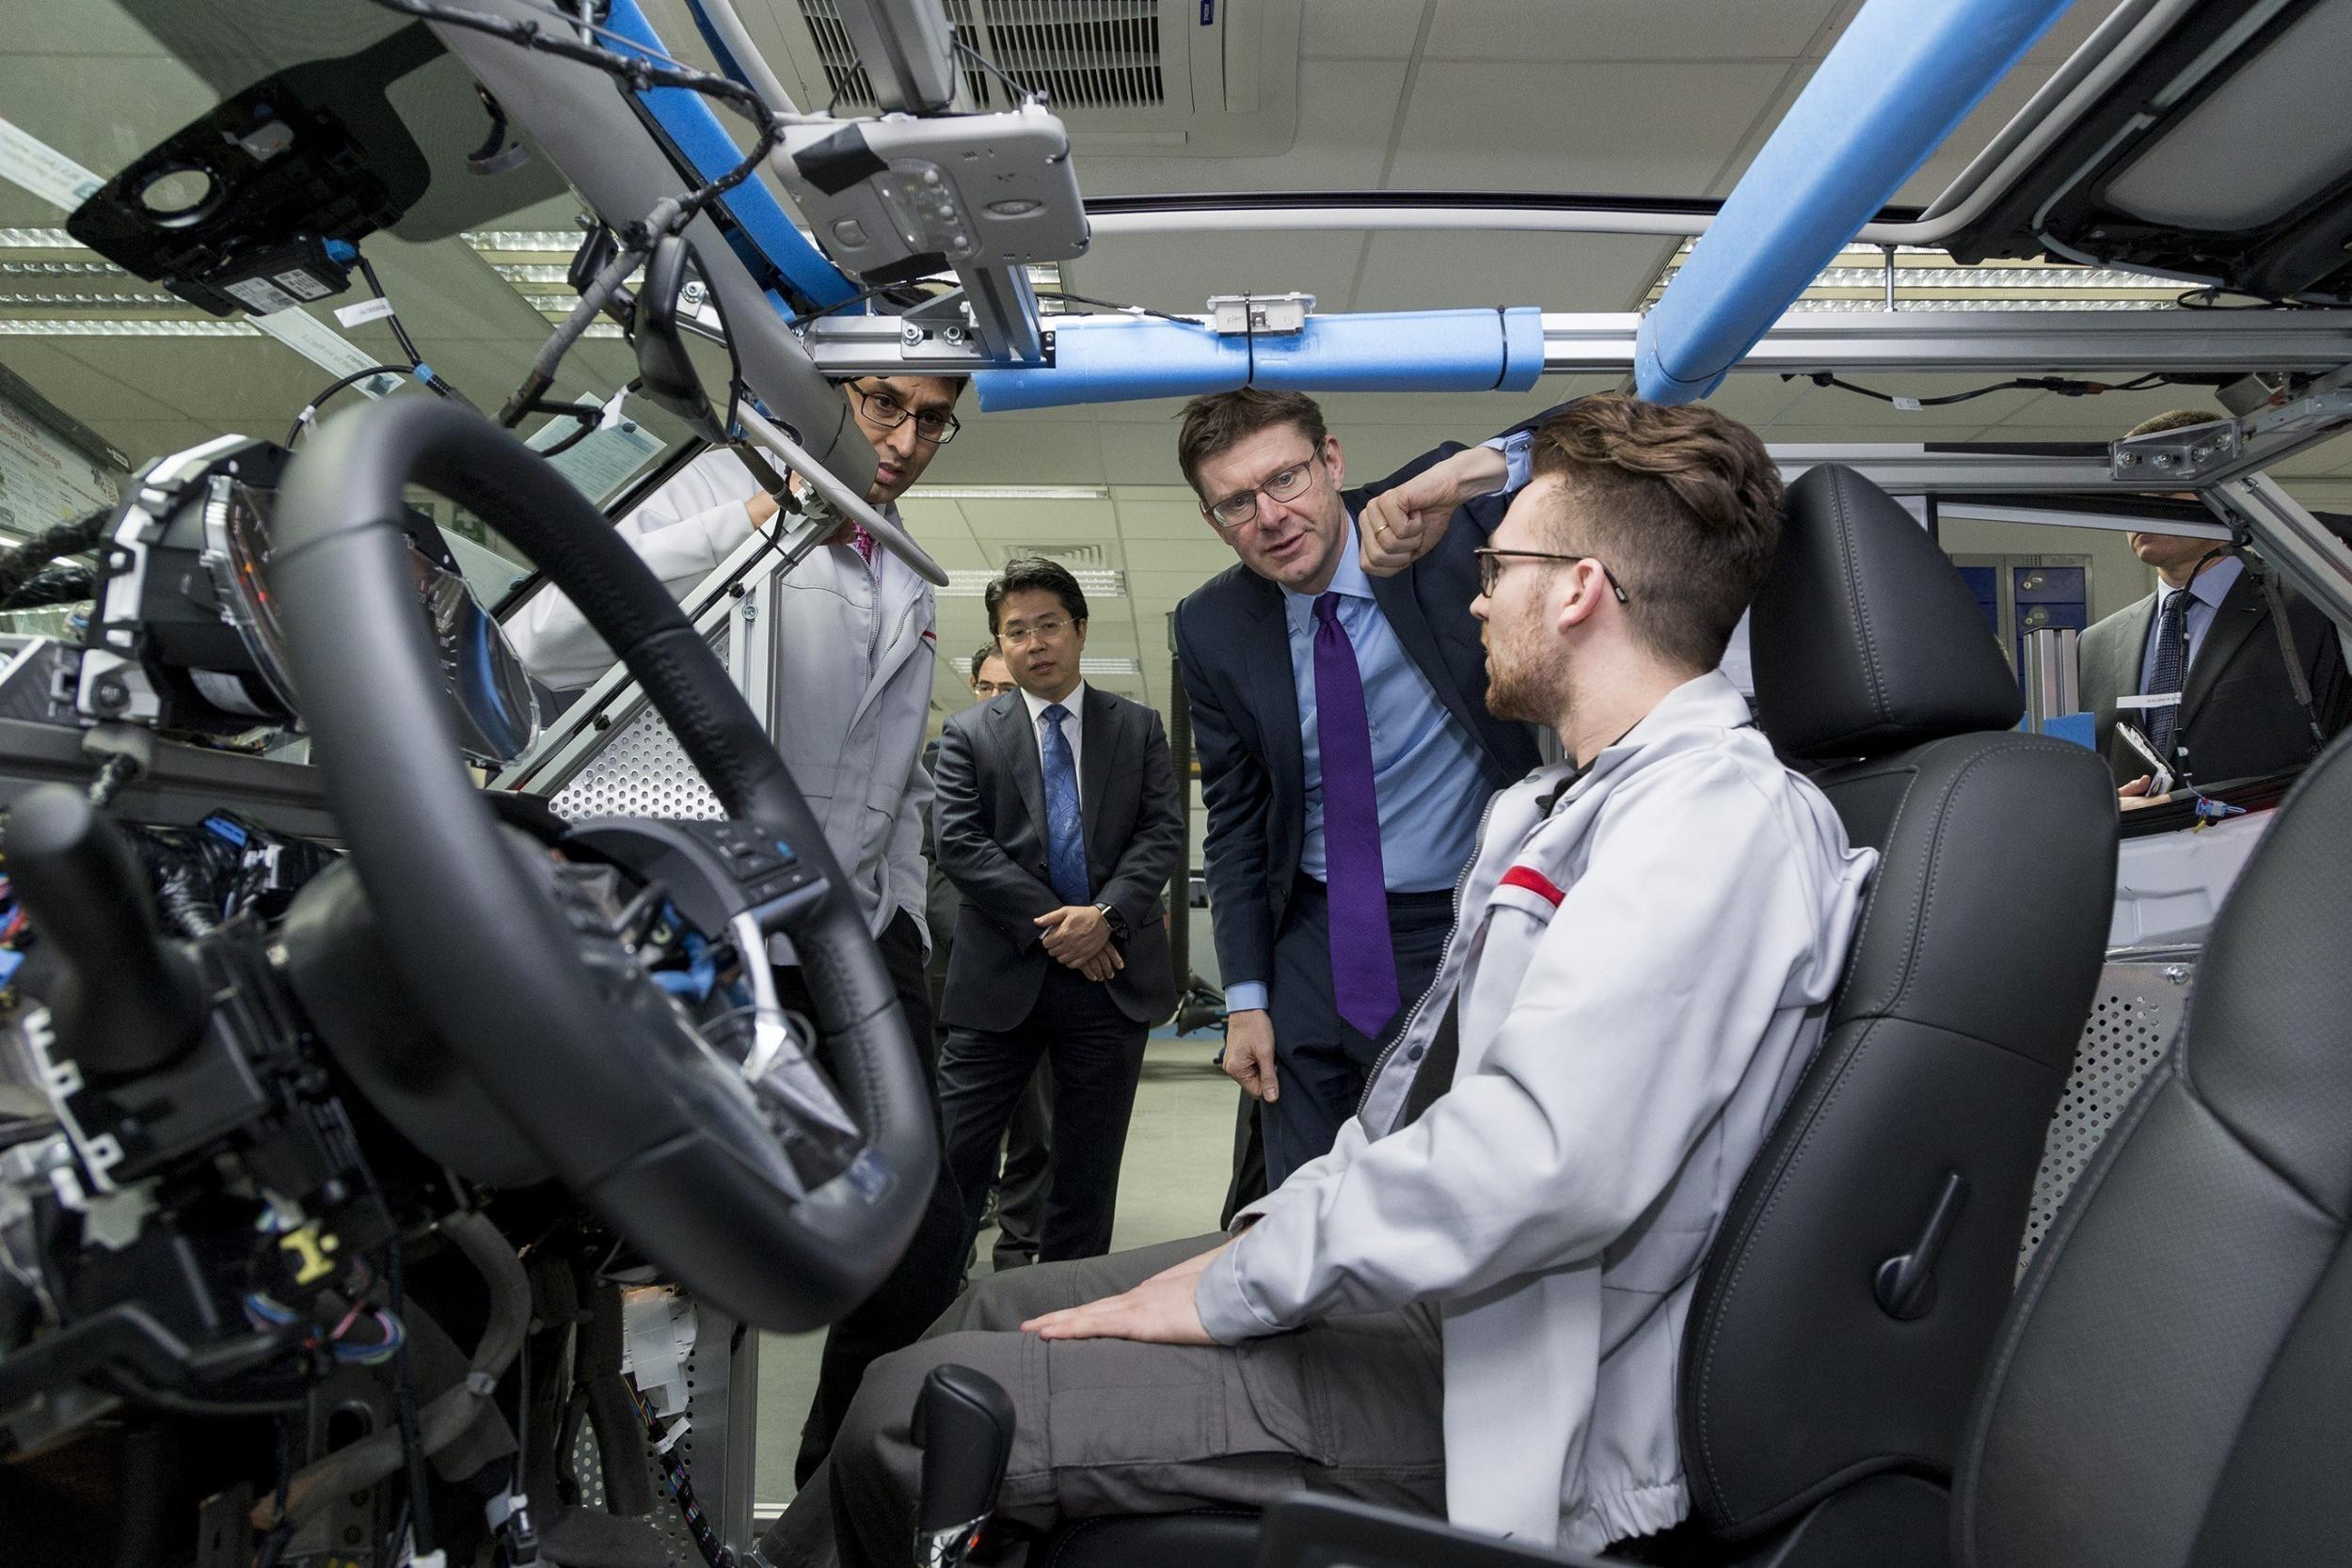 UK Secretary of State Greg Clark visits Nissan’s European R&D headquarters to discuss future technology rollout in UK auto industry